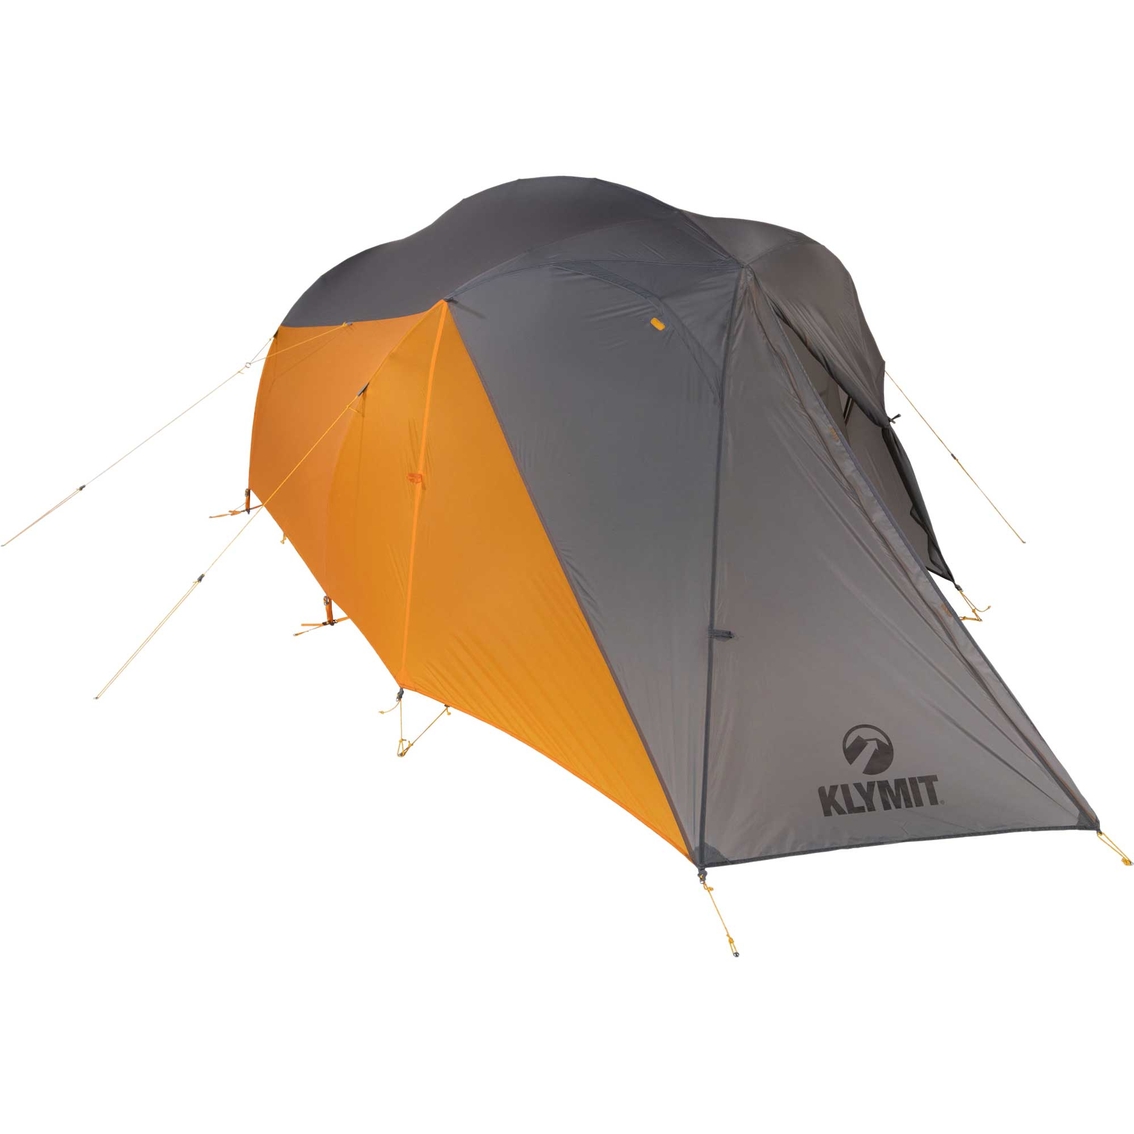 Klymit Maxfield 2 Person Lightweight Backpacking Tent - Image 3 of 10